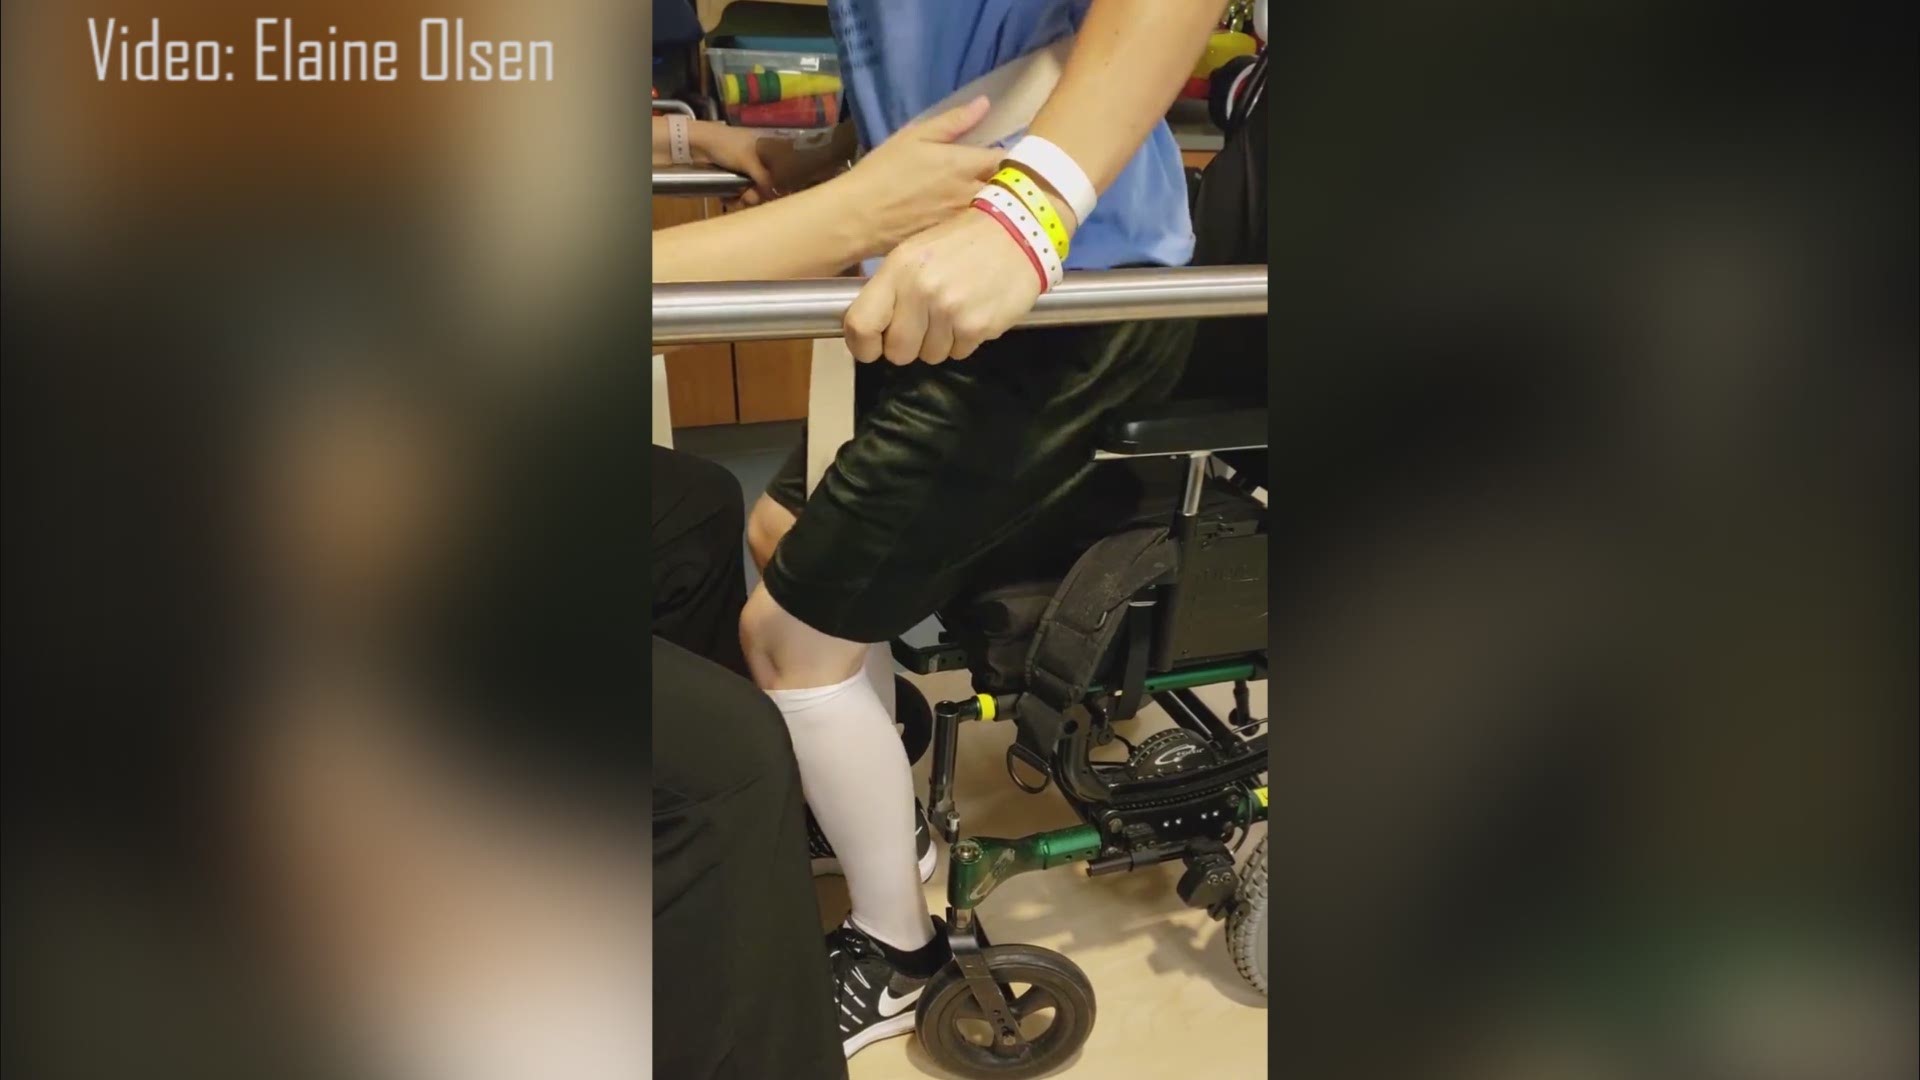 Jadon Olsen was hit by a fallen tree branch during Hurricane Florence. After surgery, he was in a coma and on a ventilator for three days.